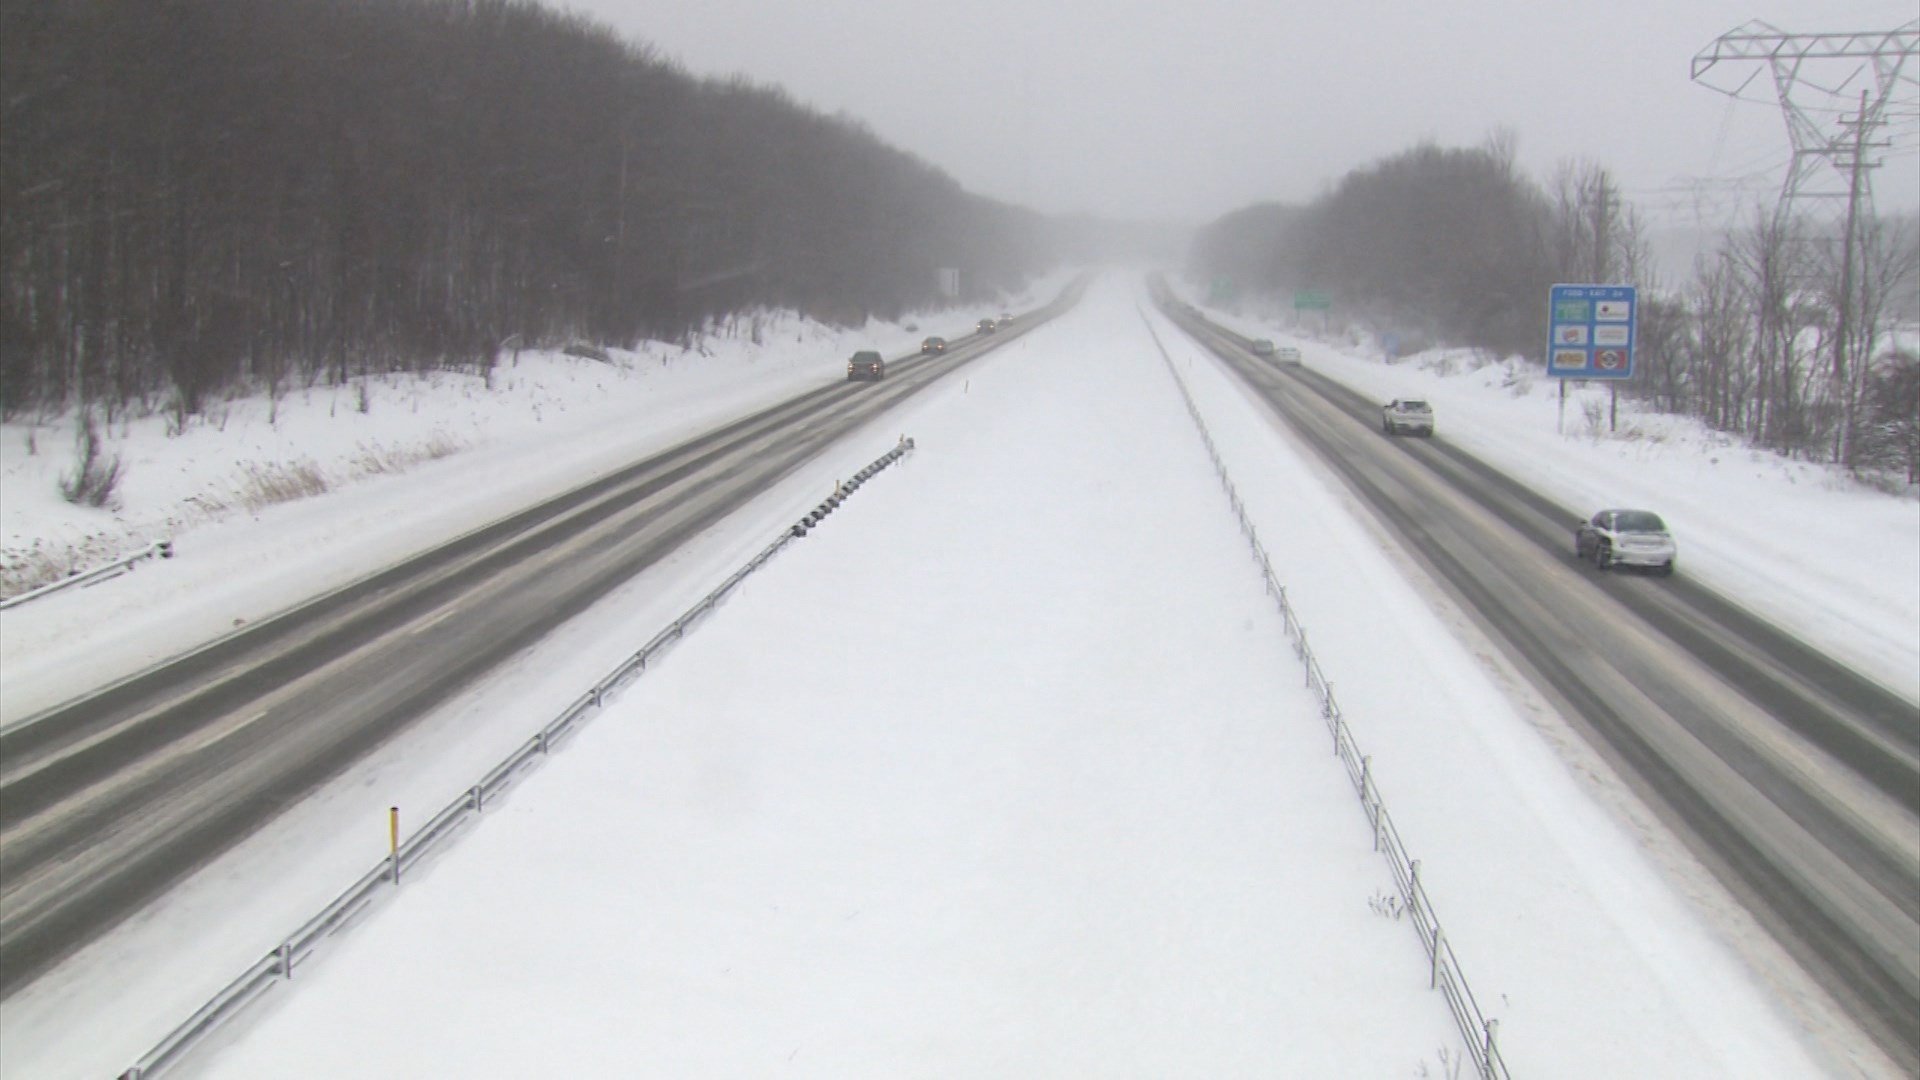 PennDOT Plans to Reduce Speed Limit on Interstates Due to Icy Weather